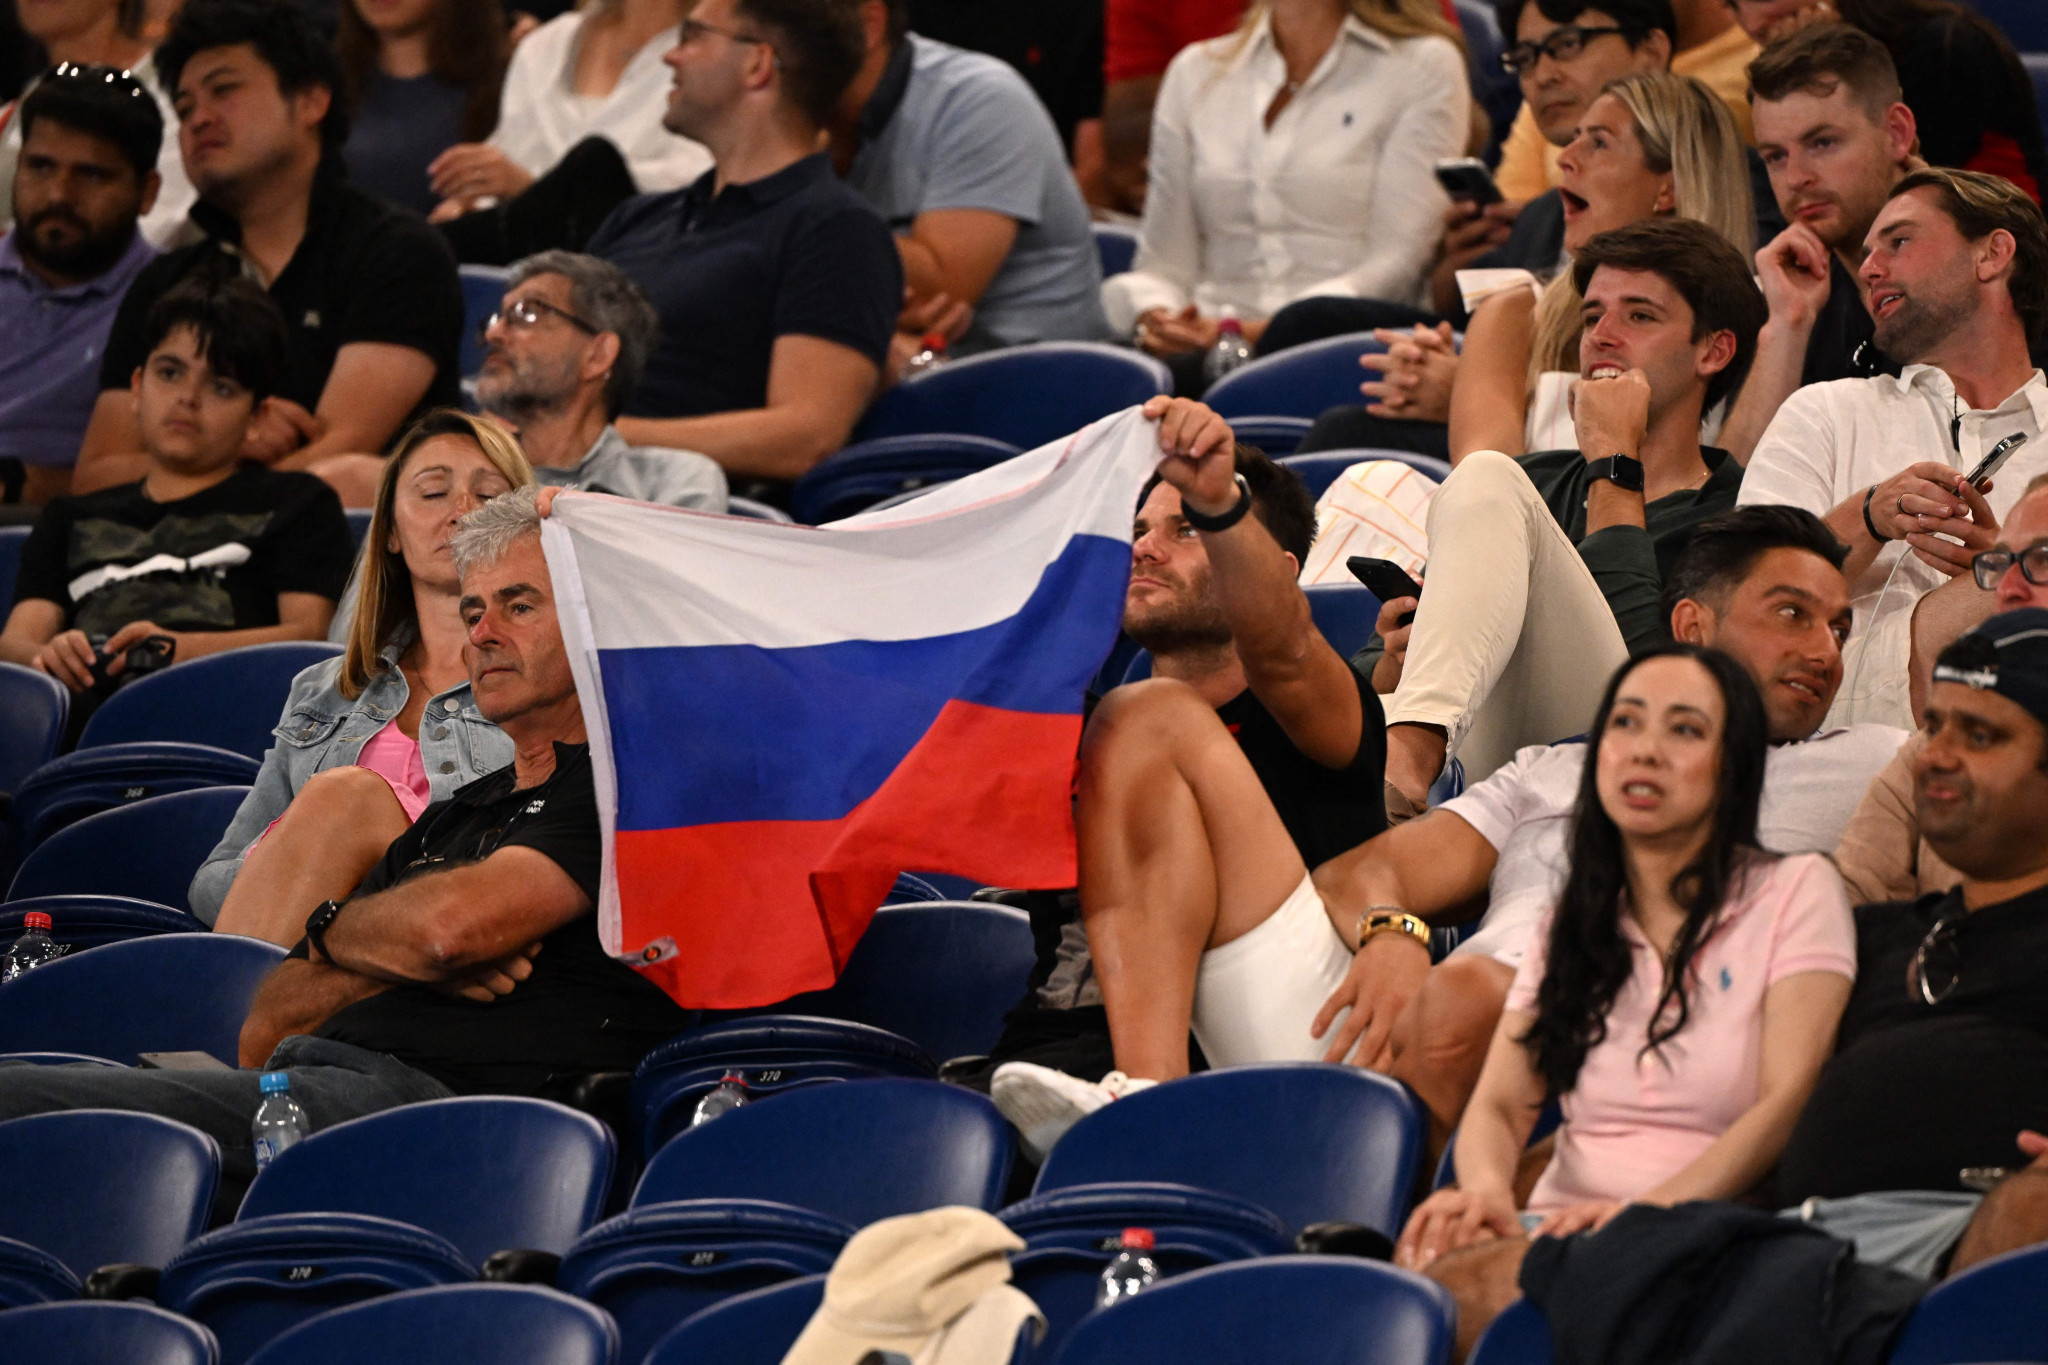 Wimbledon is set to impose a ban on Russian flags after courtside incidents at the Australian Open ©Getty Images